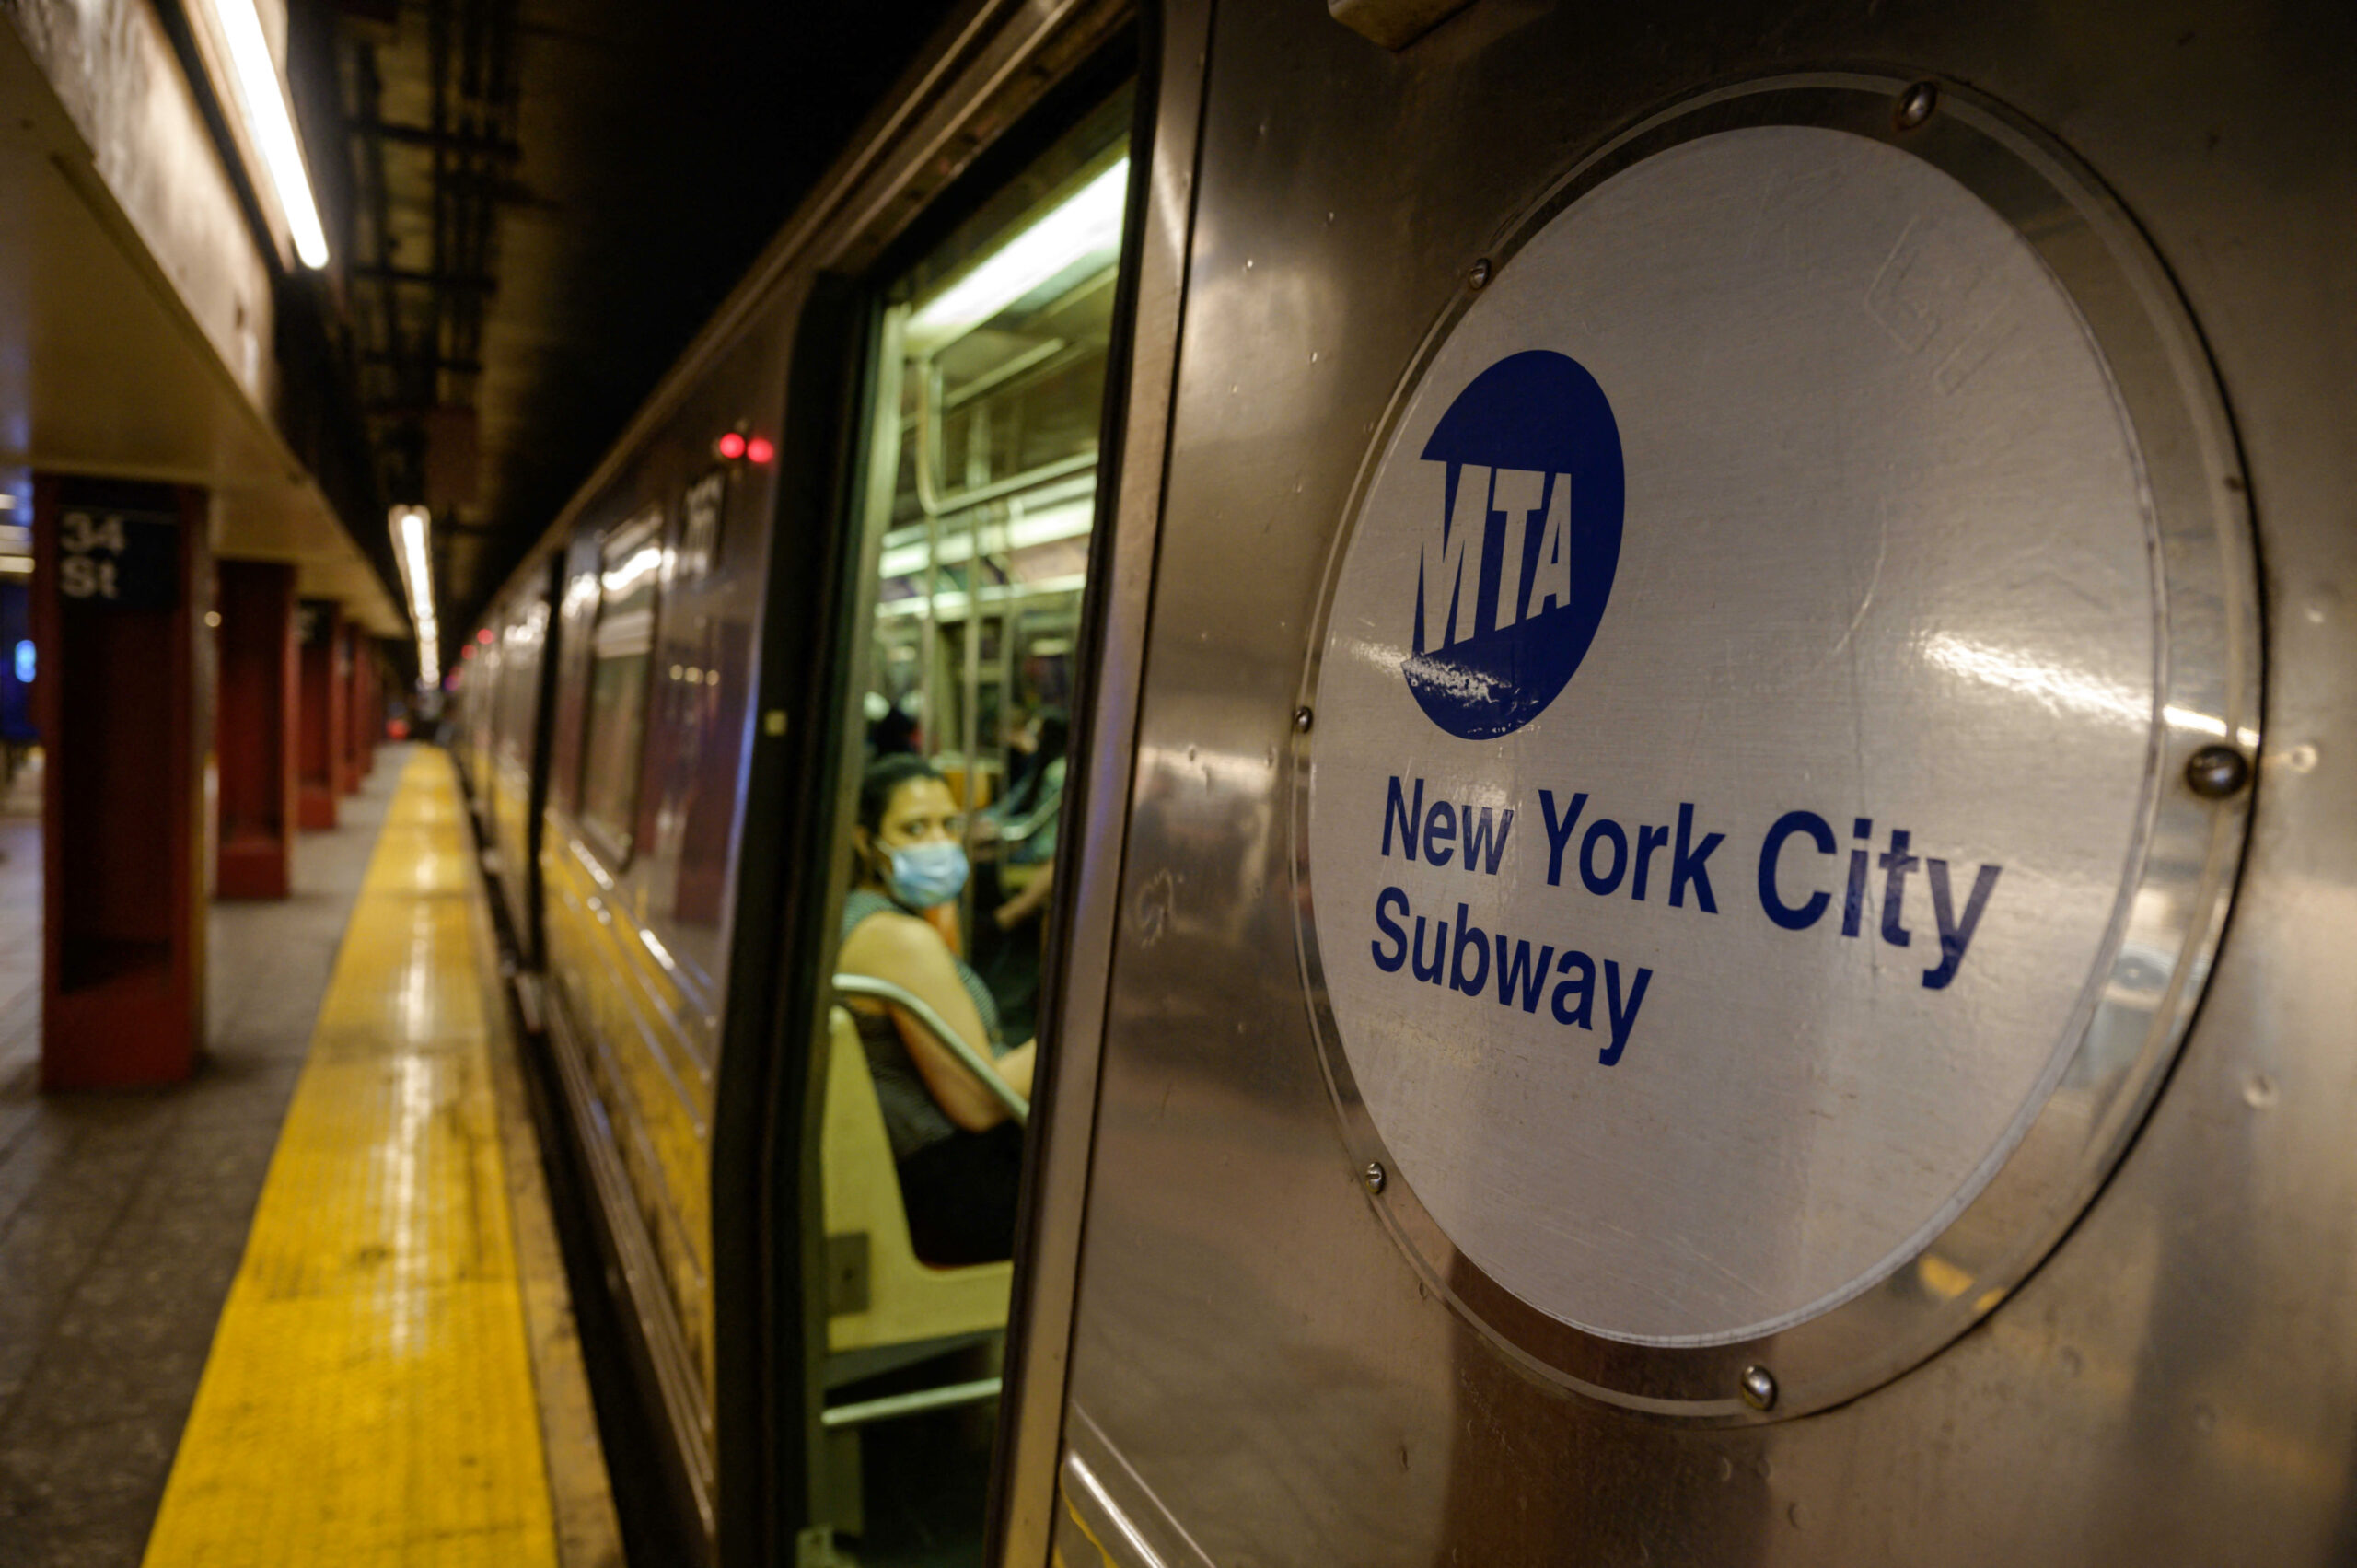 A Metropolitan Transportation Authority (MTA) logo is displayed on the side of a subway train in Manhattan, New York on June 2, 2021. Ed Jones | AFP | Getty Images